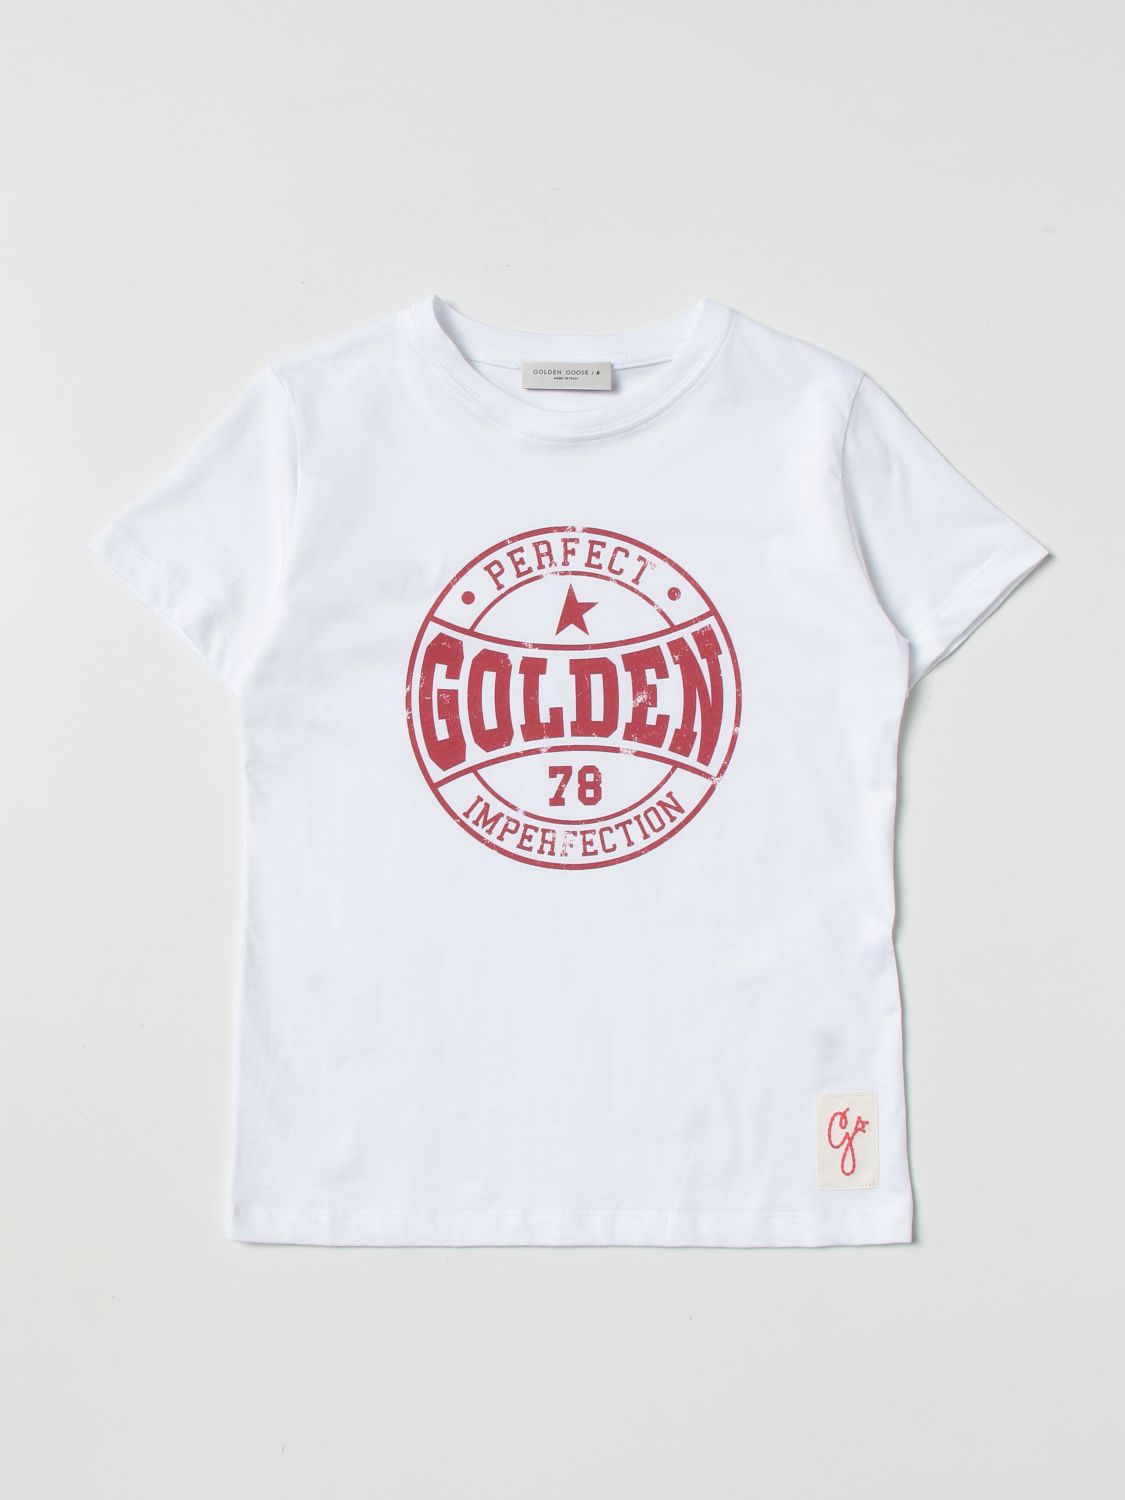 GOLDEN GOOSE PERFECT 78 IMPERFECTION T-SHIRT,376534001